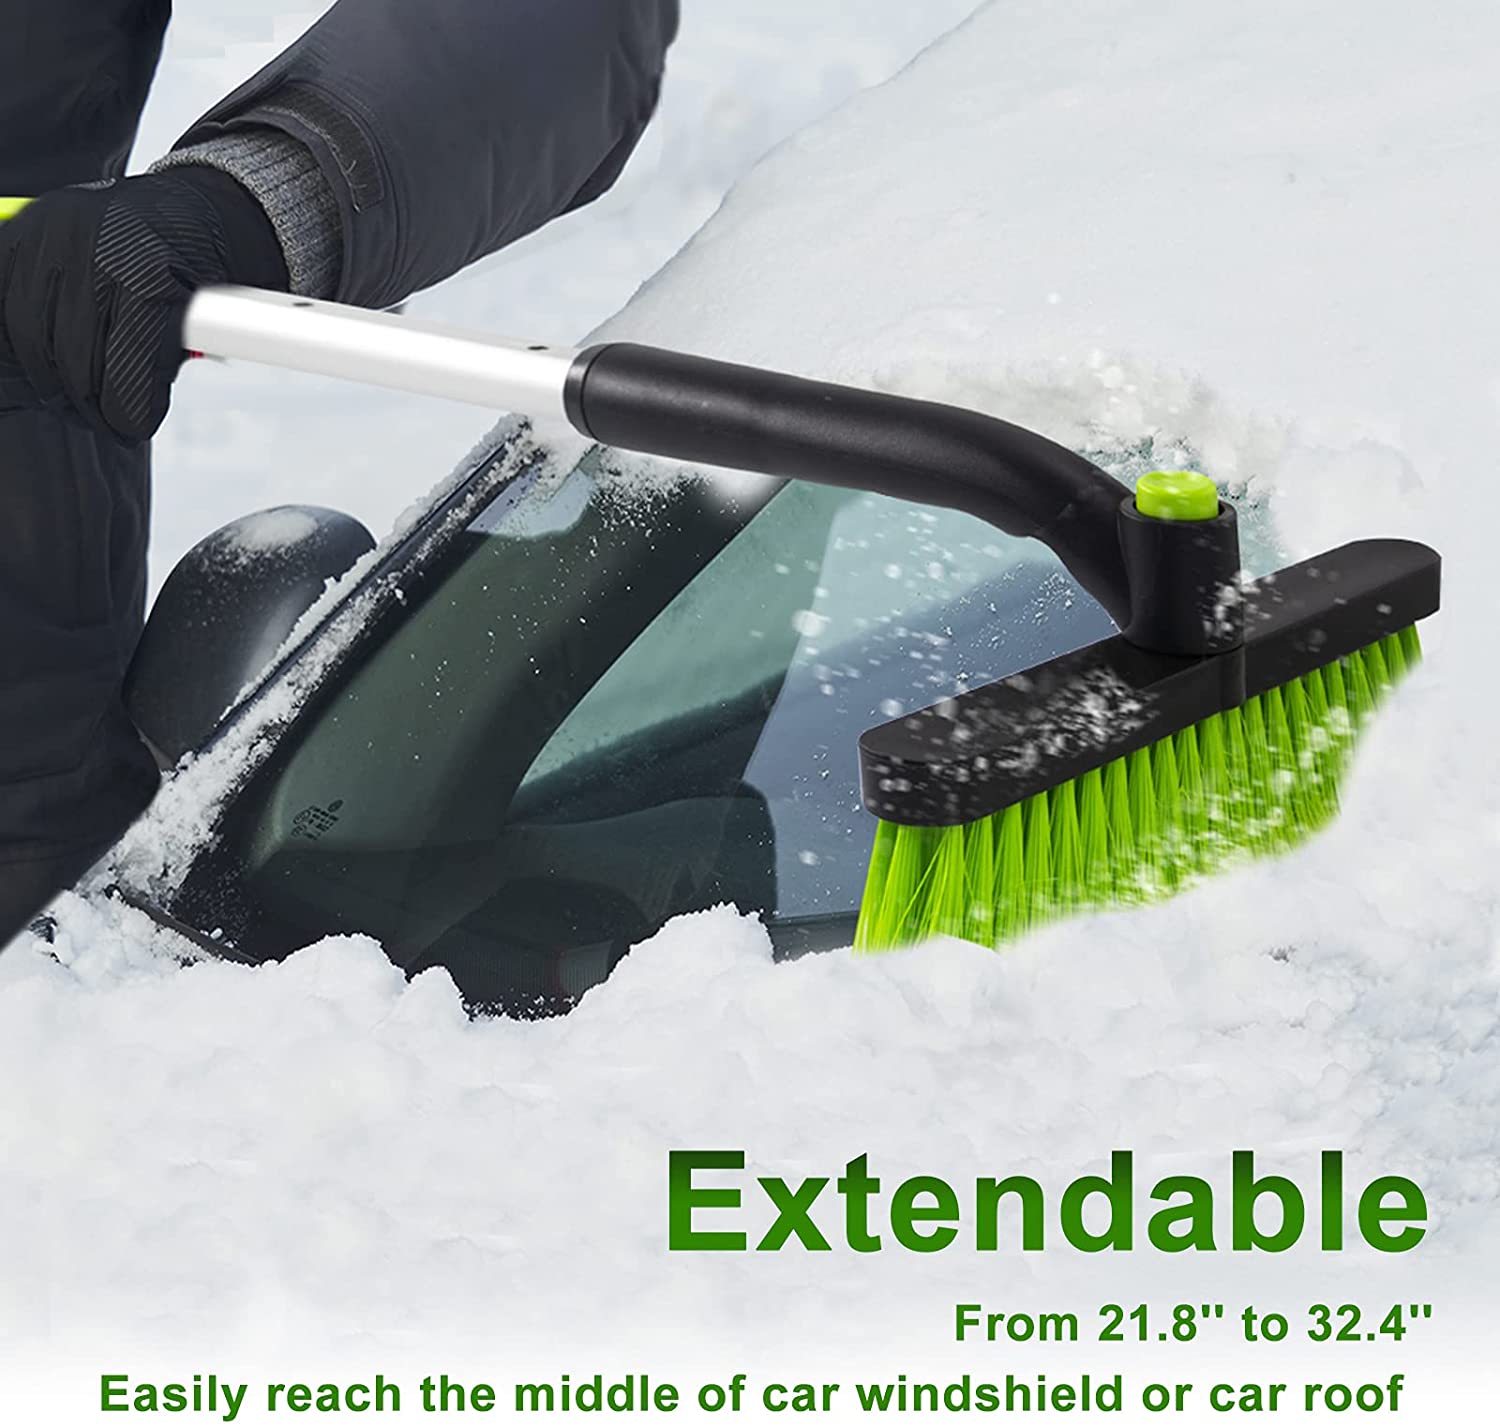 SEAAES Ice Scraper with Snow Brush for Car Windshield, Extendable Snow  Brush with Foam Grip for Truck SUV Wehicle Windows